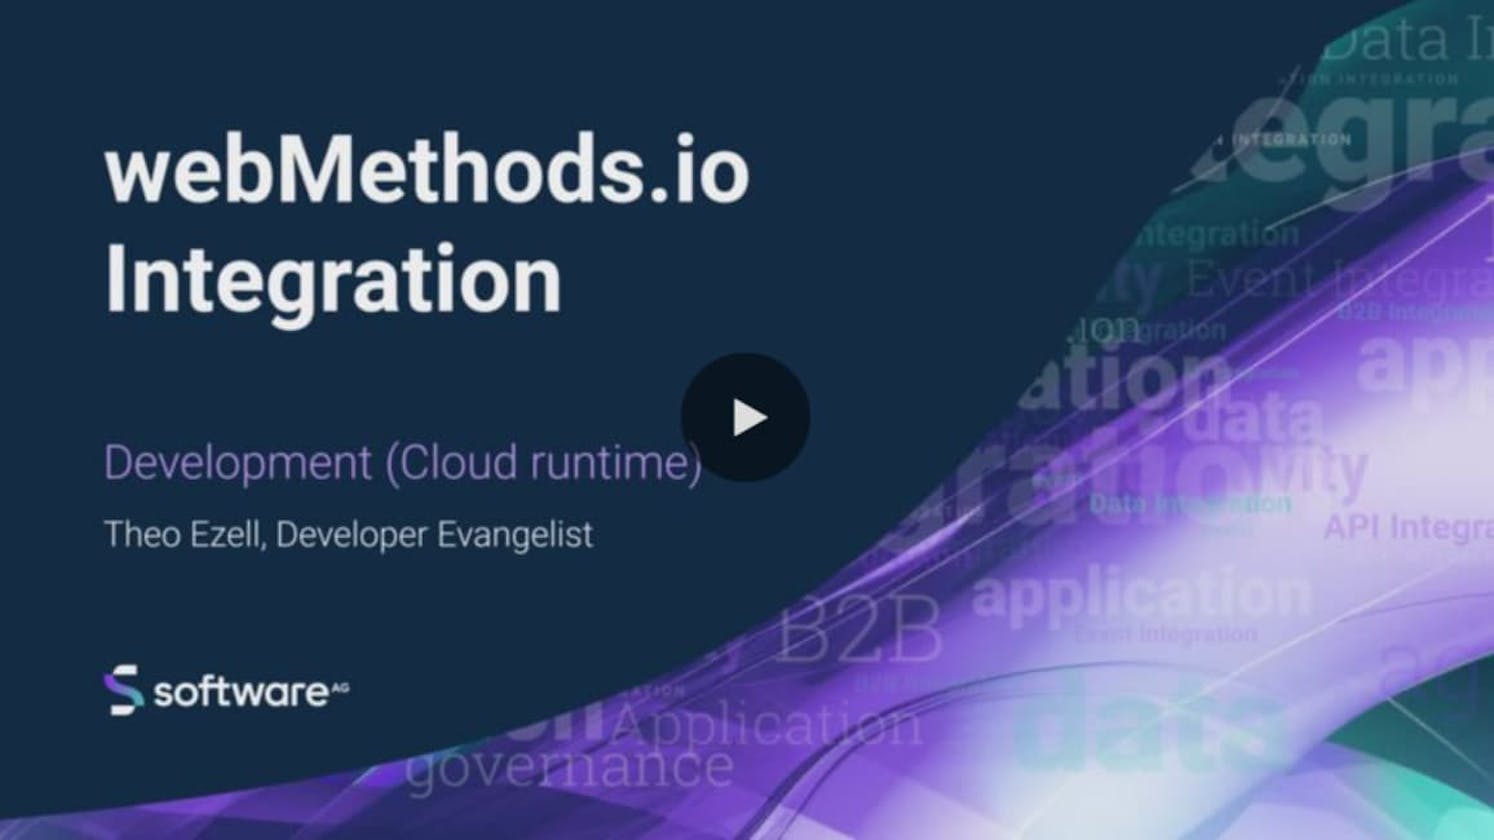 Create and develop Flow services to run on the Cloud Runtime with webMethods.io Integration